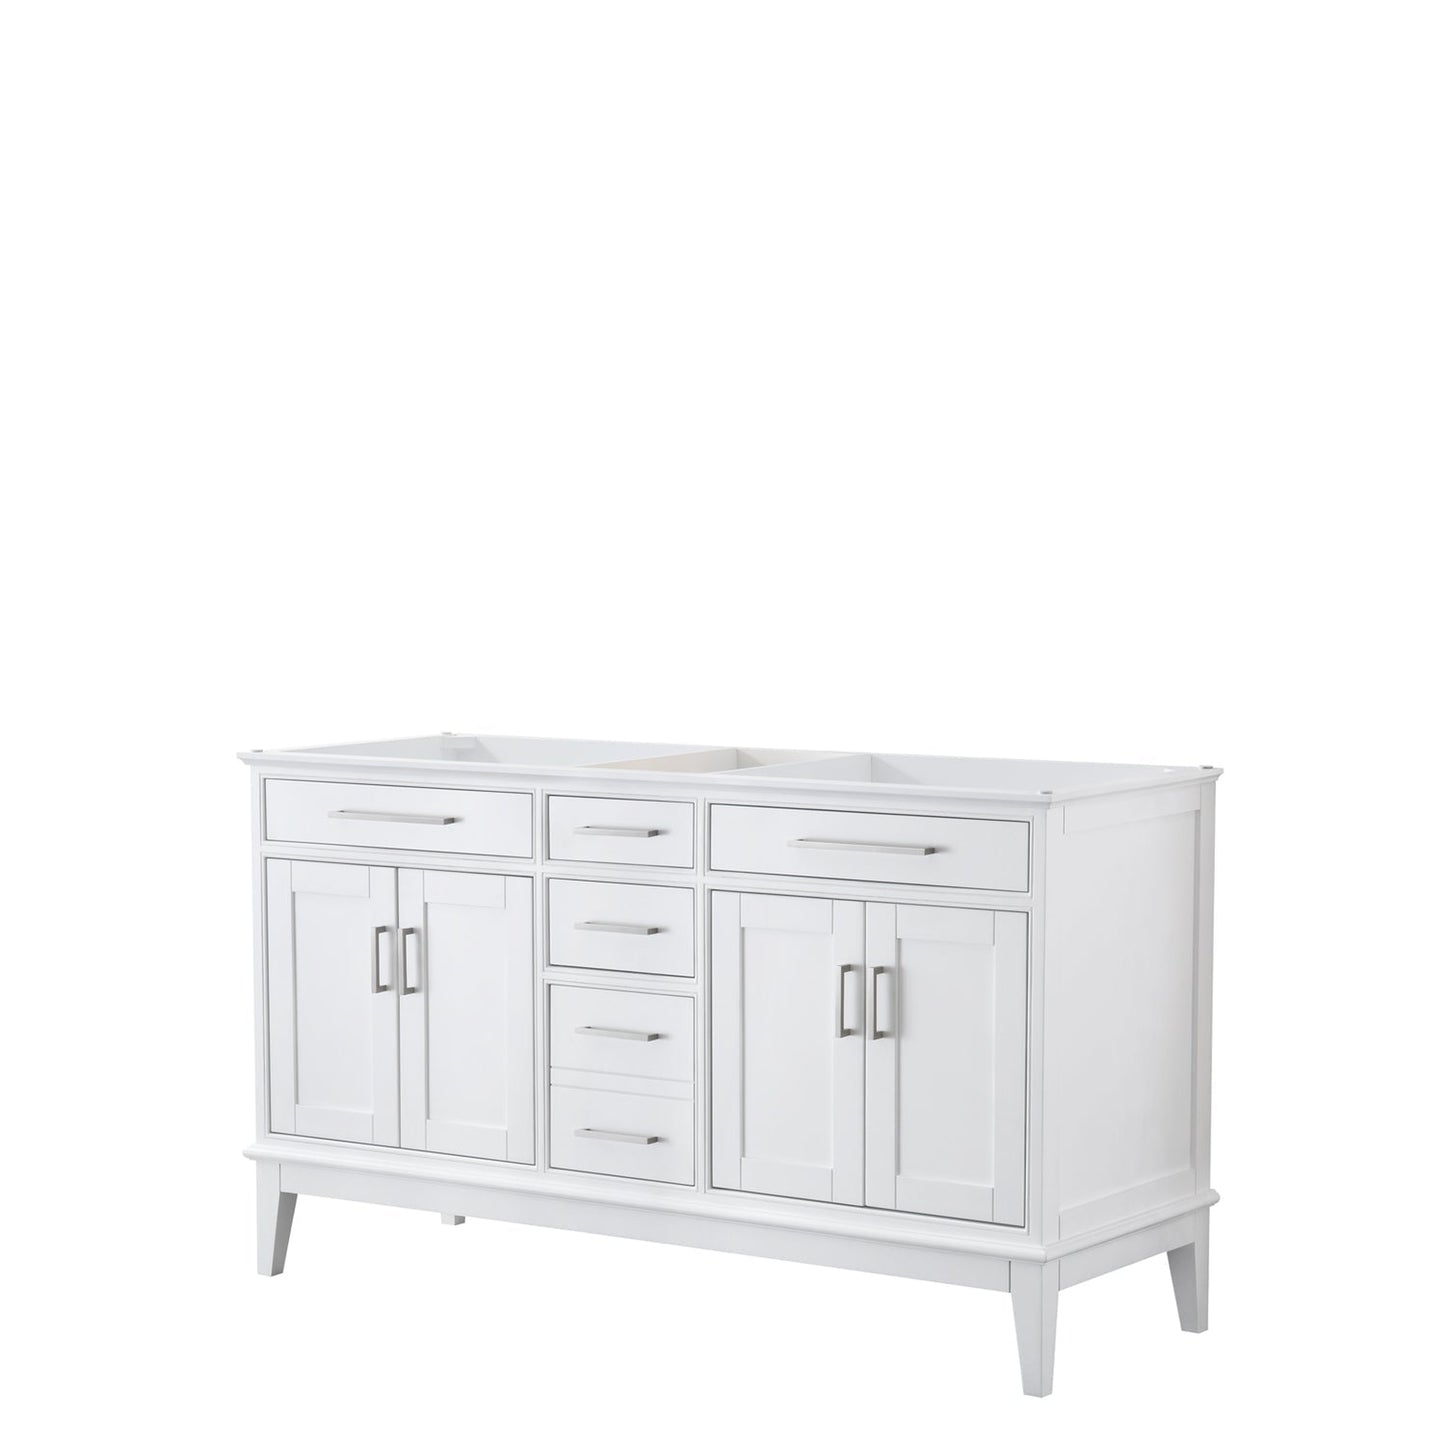 Wyndham Collection Margate 60" Double Bathroom White Vanity